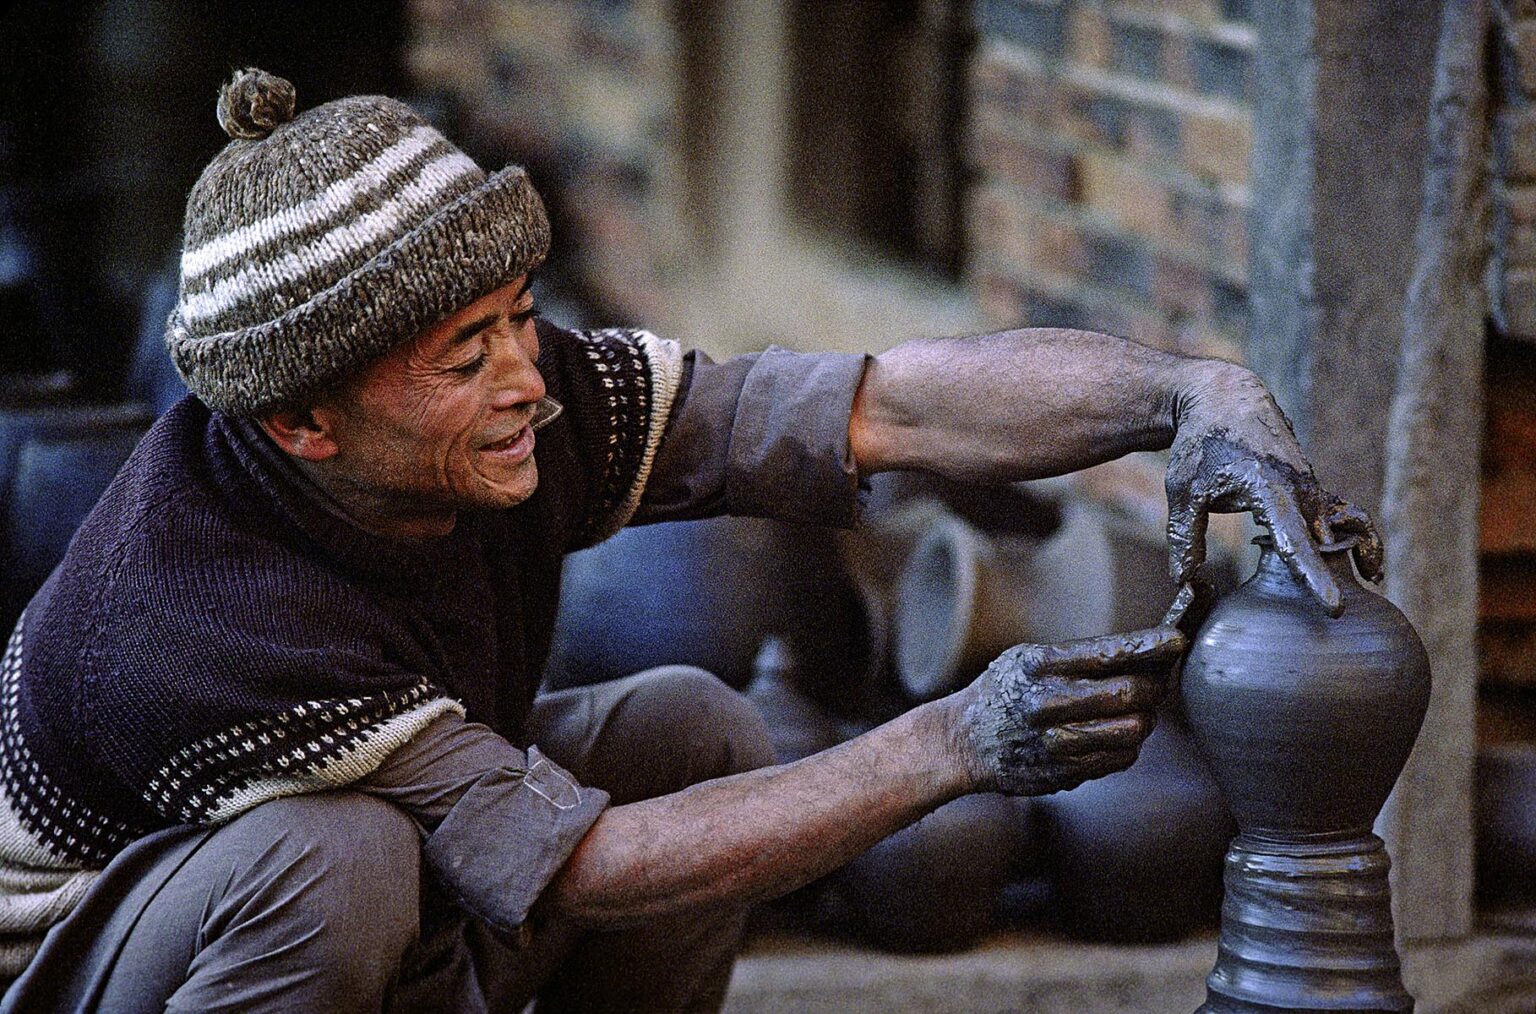 A POTTER is hard at work in the Pottery Bazaar of BHAKTAPUR, NEPAL